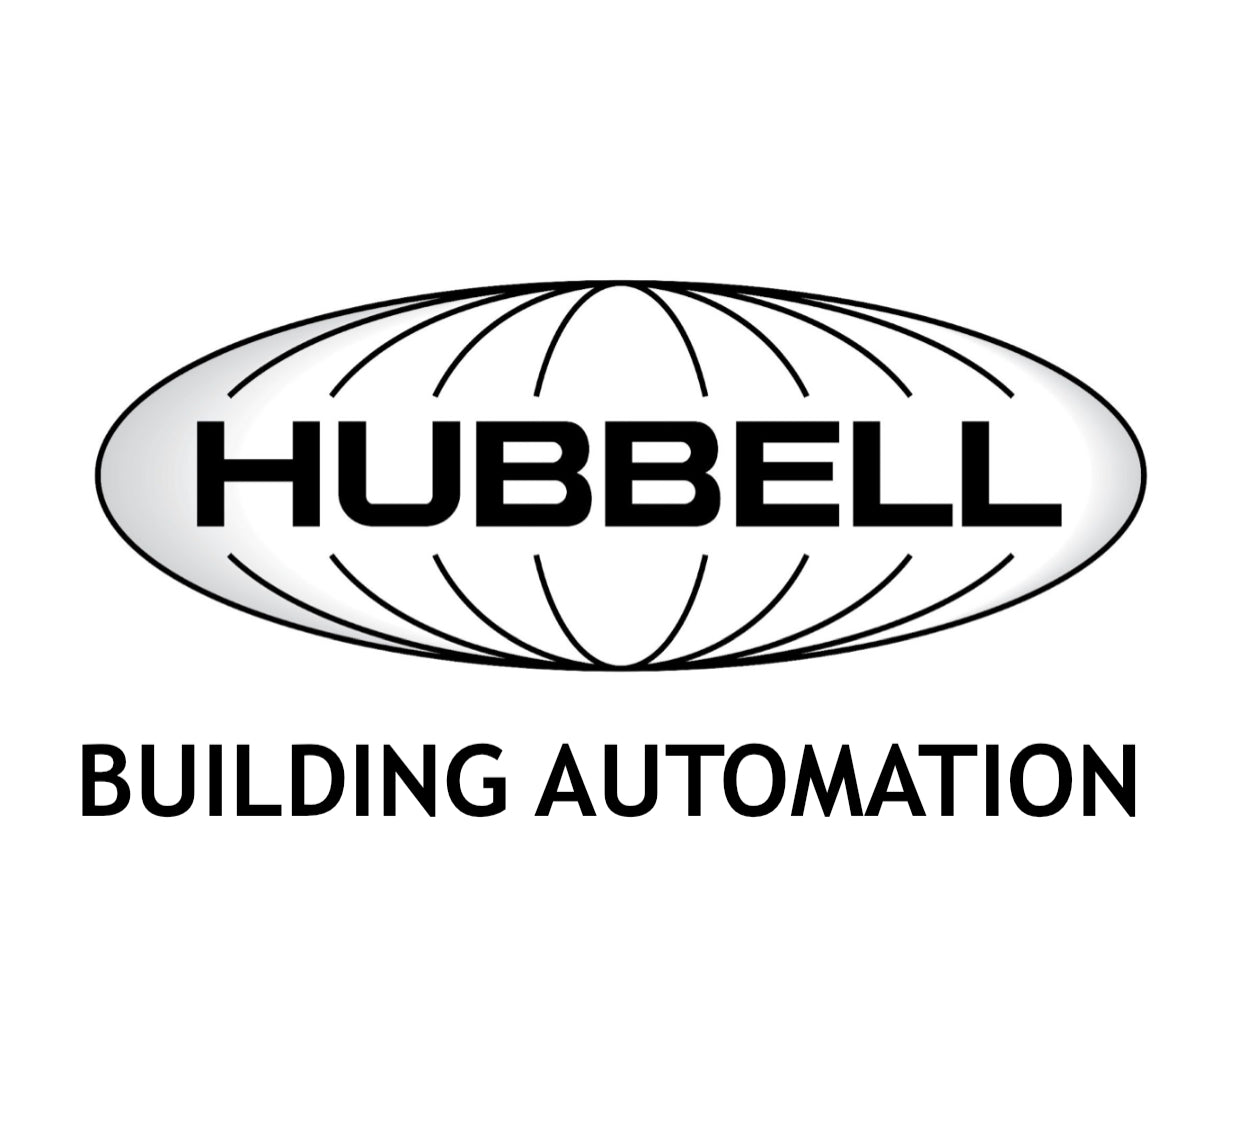 HUBBELL BUILDING AUTOMATION INC.